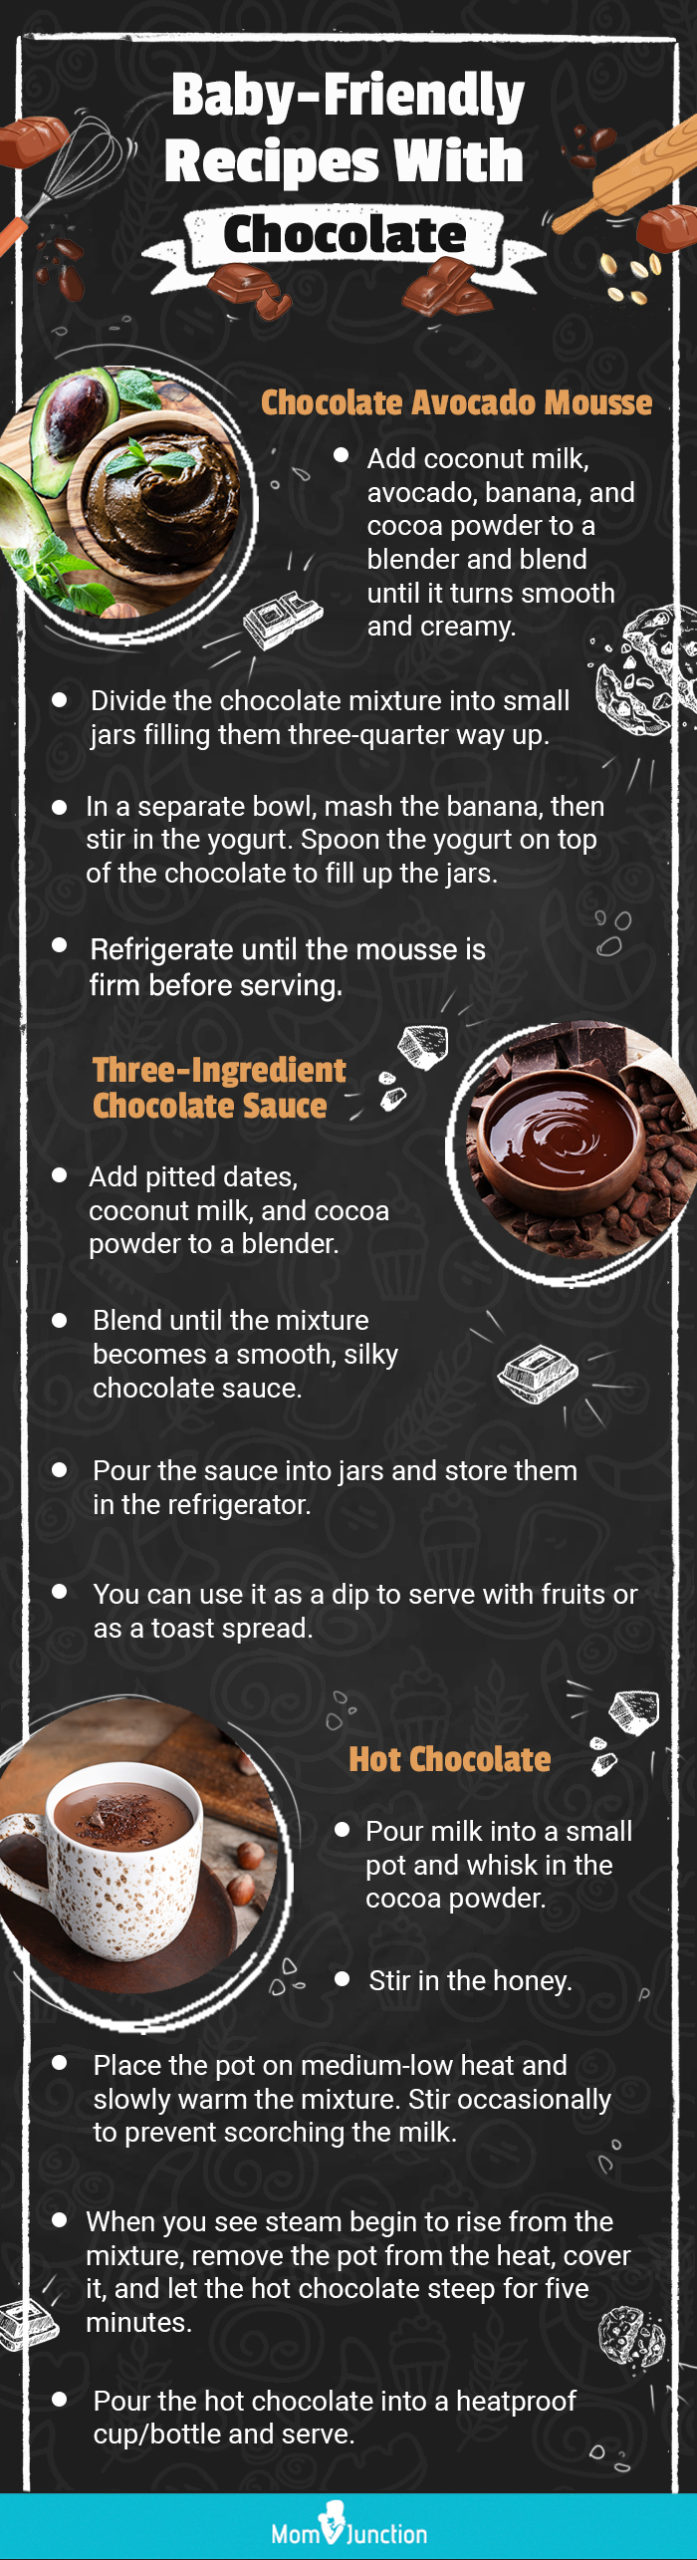 recipes with chocolate for babies (infographic)